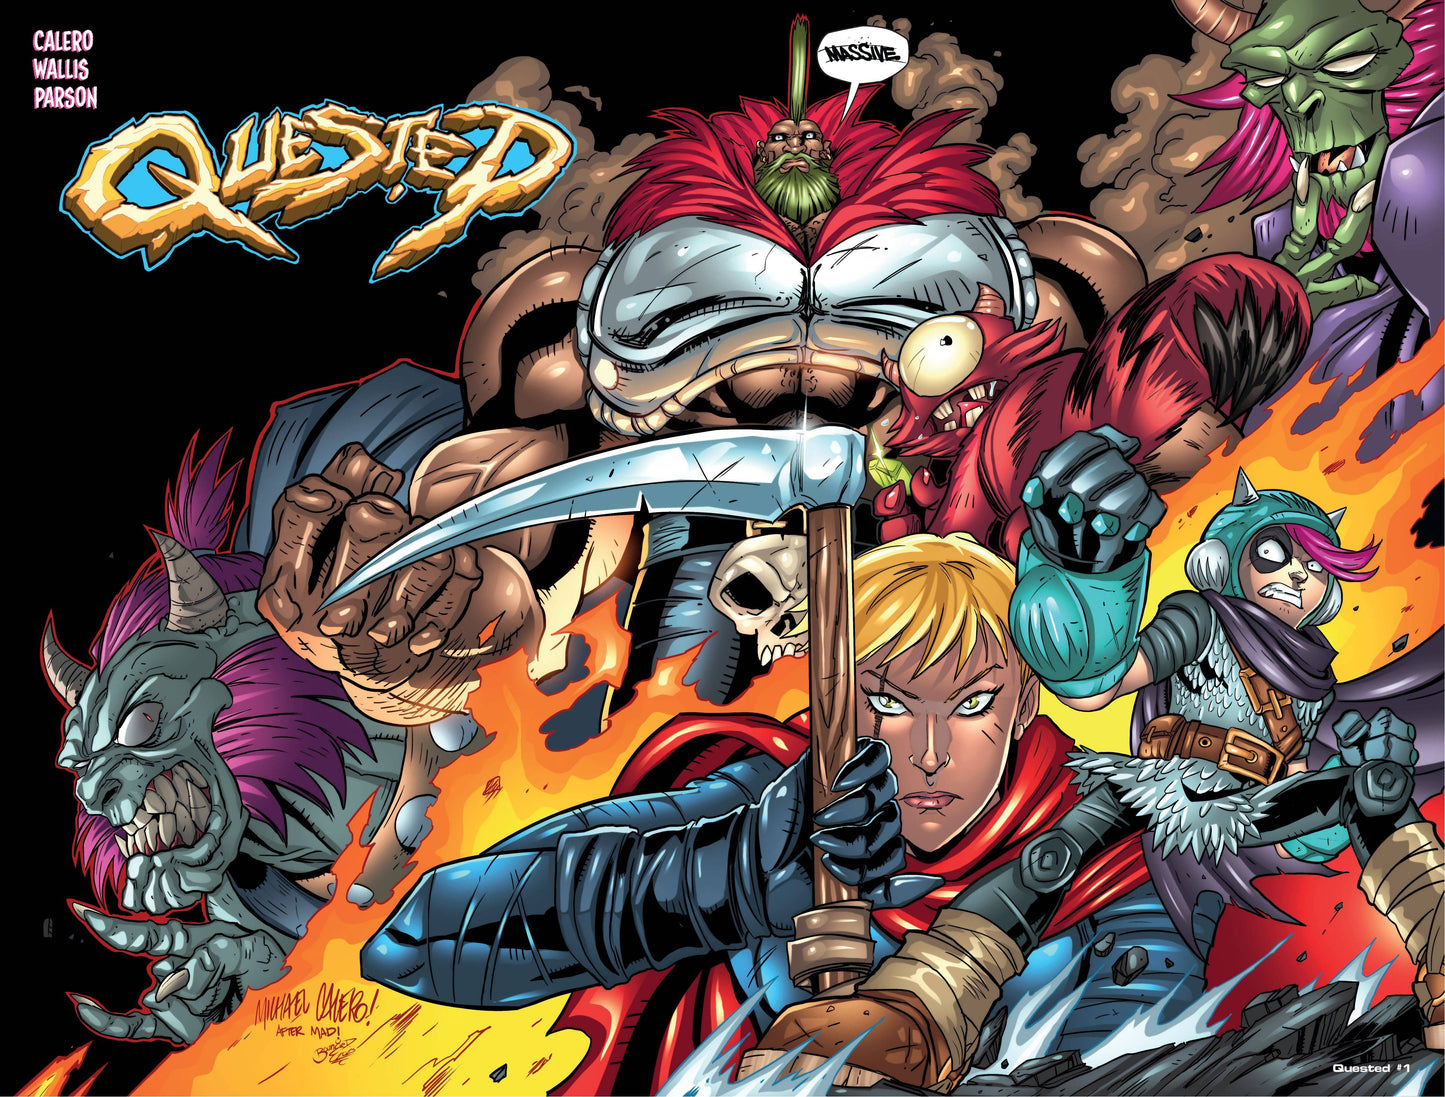 QUESTED VOL 2 #1 | CVR D CALERO BATTLE CHASERS HOMAGE